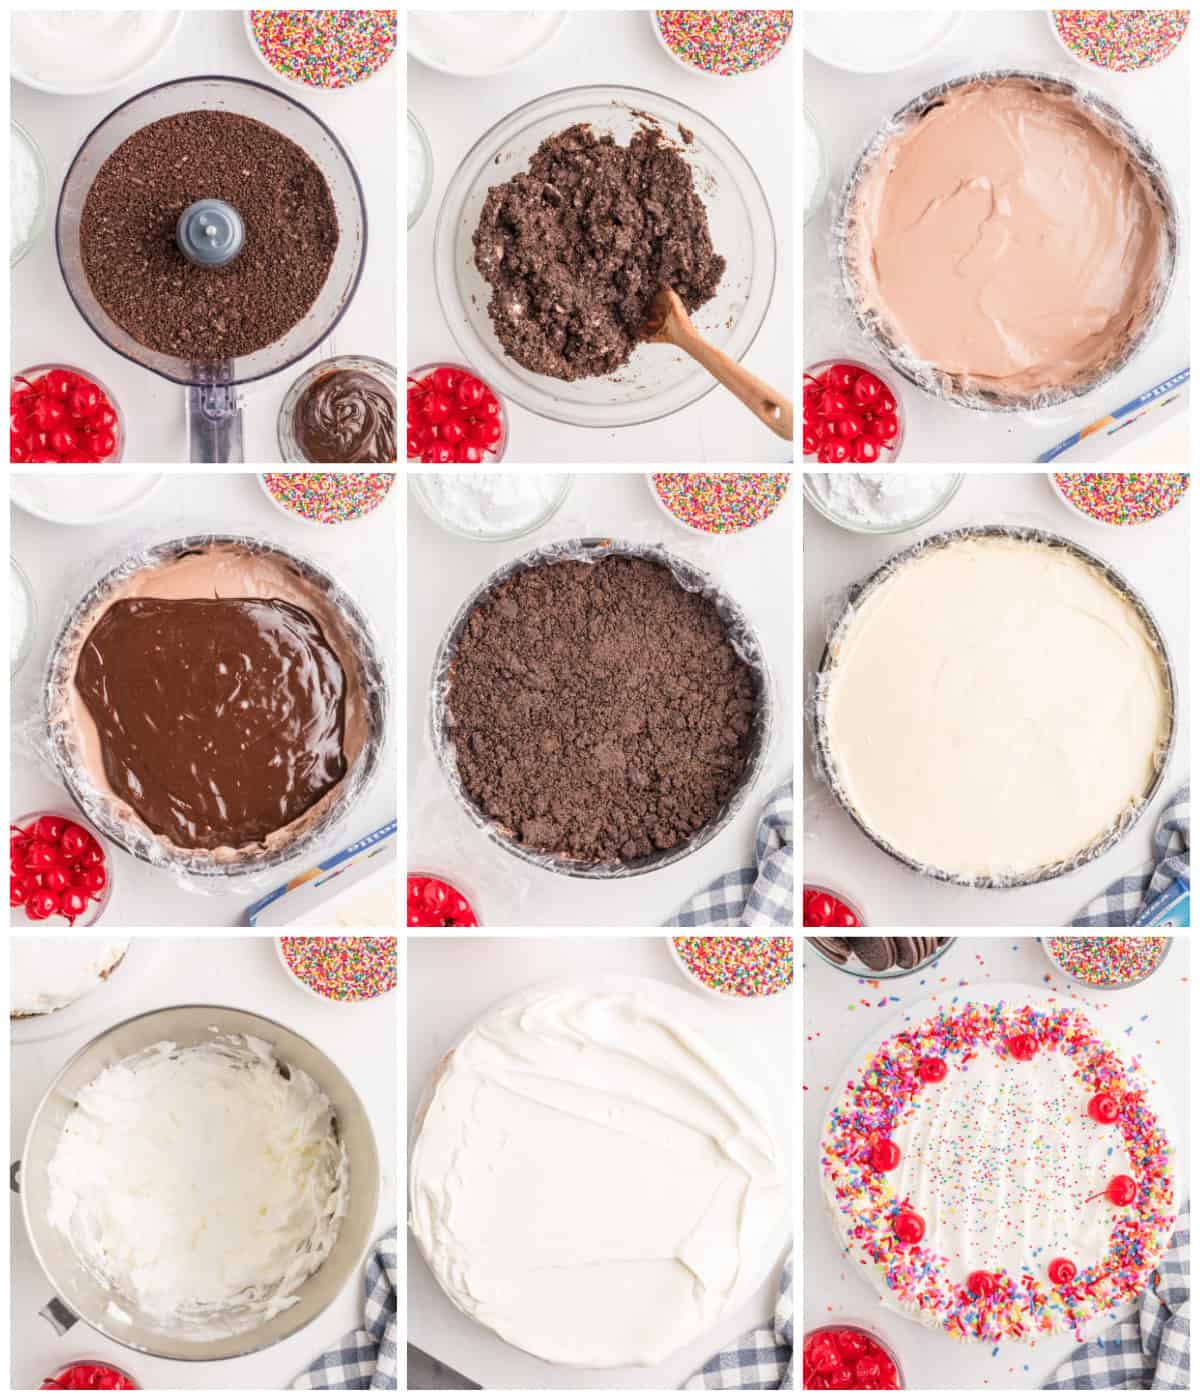 Step by step photos on how to make a Copycat Dairy Queen Ice Cream Cake.